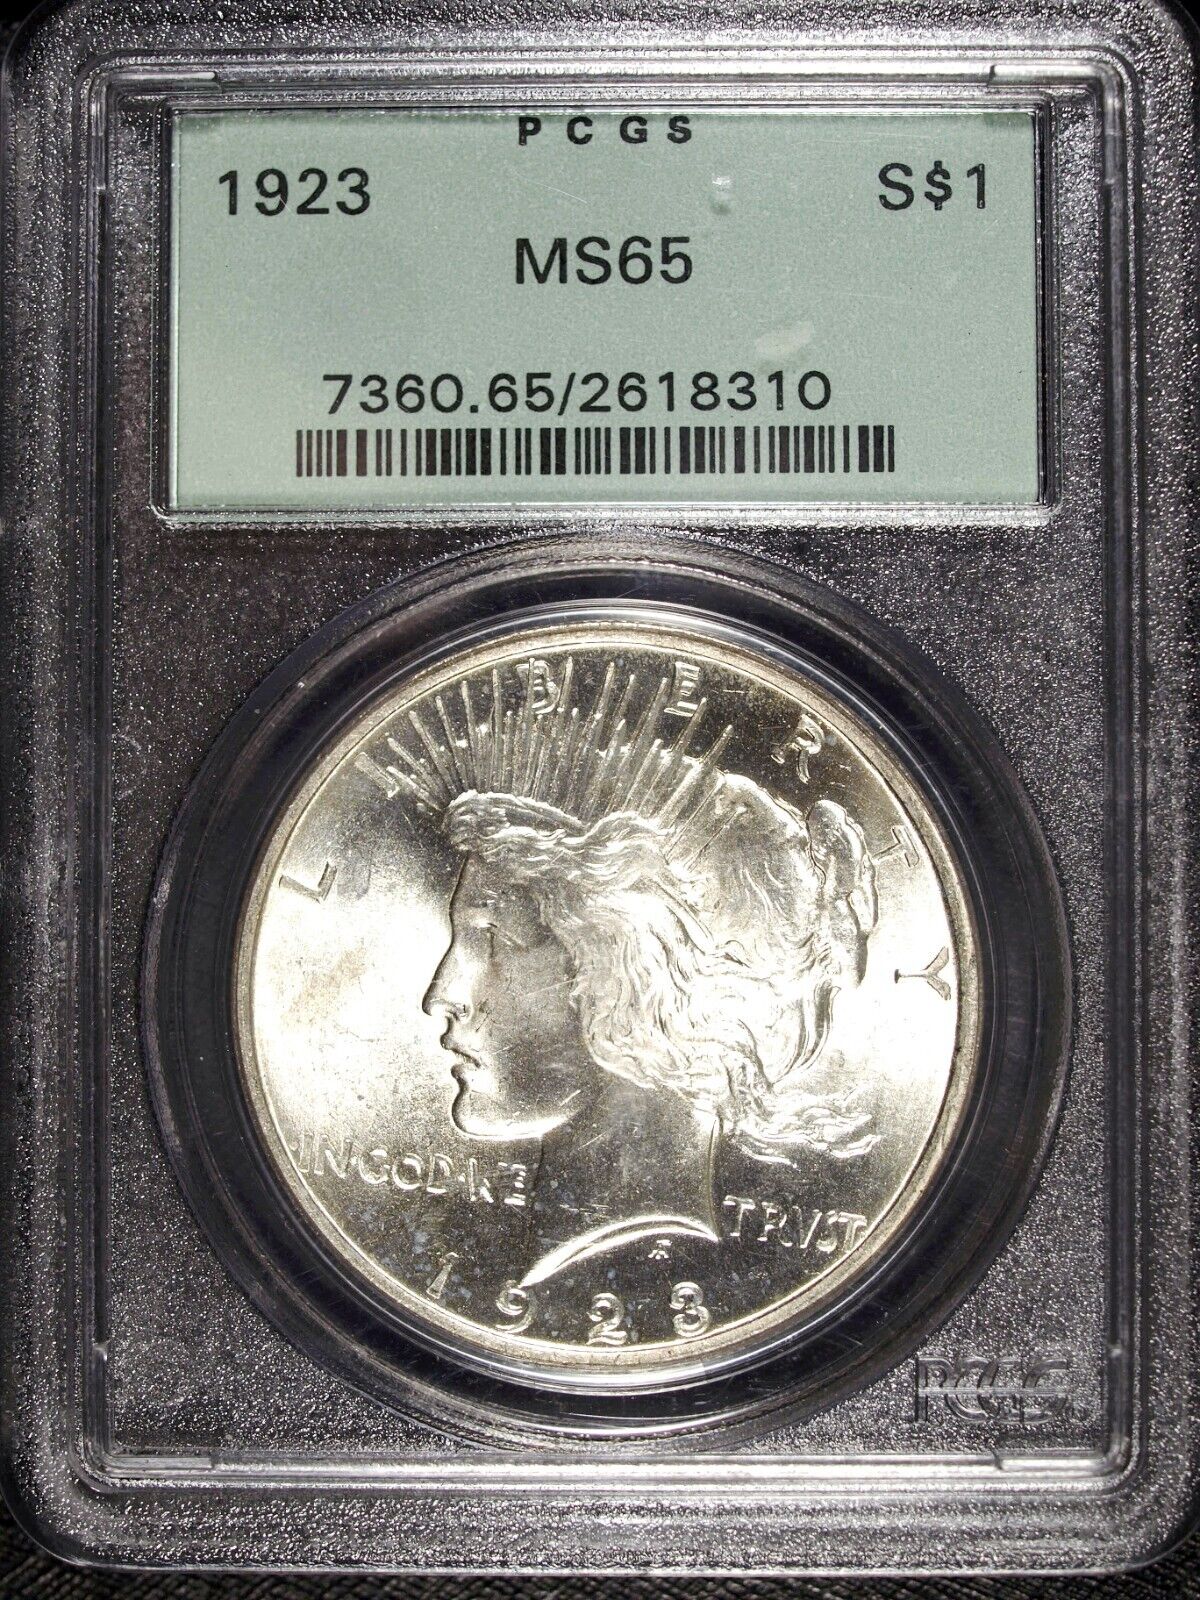 1923 P PCGS MS 65 Peace Silver Dollar ☆☆ Old Green Label ☆☆ Great For Sets 310